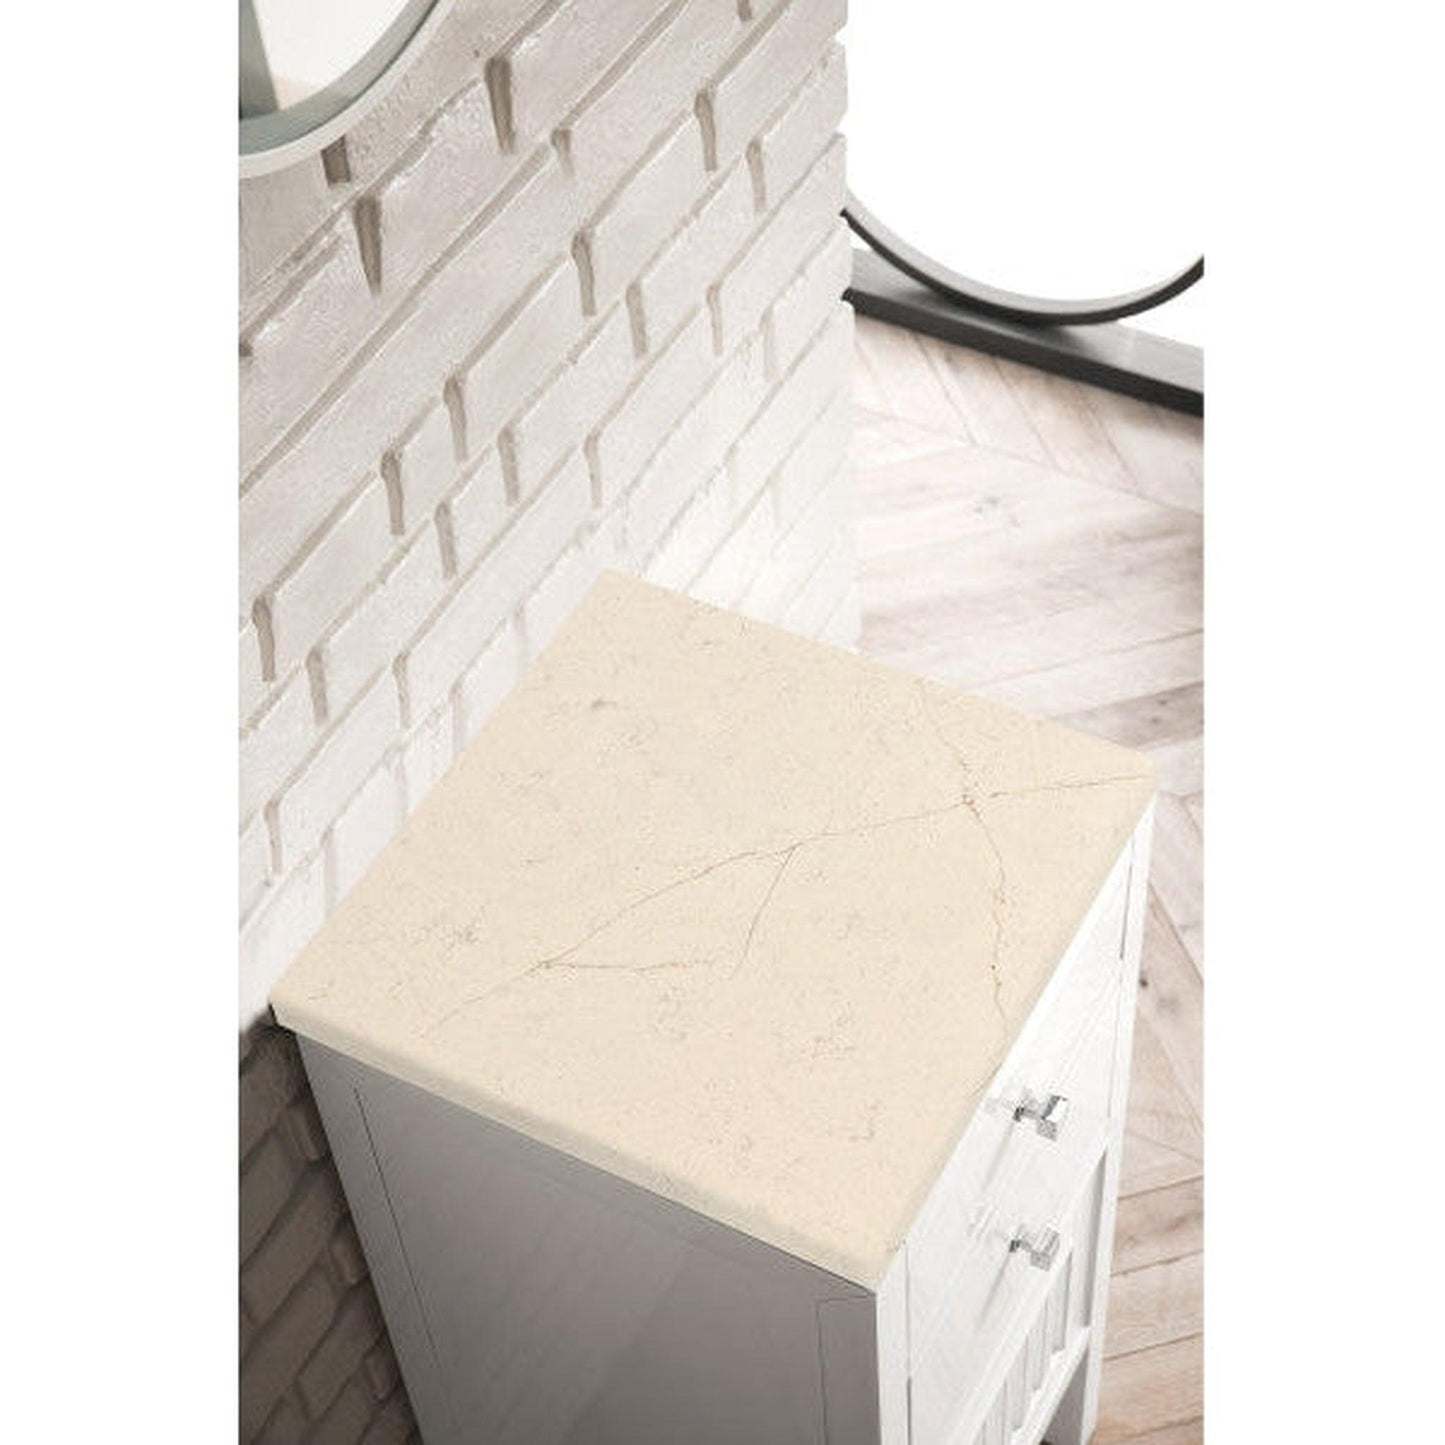 James Martin Athens 15" Right Side Opening Glossy White Side Cabinet With 1" Eternal Marfil Top